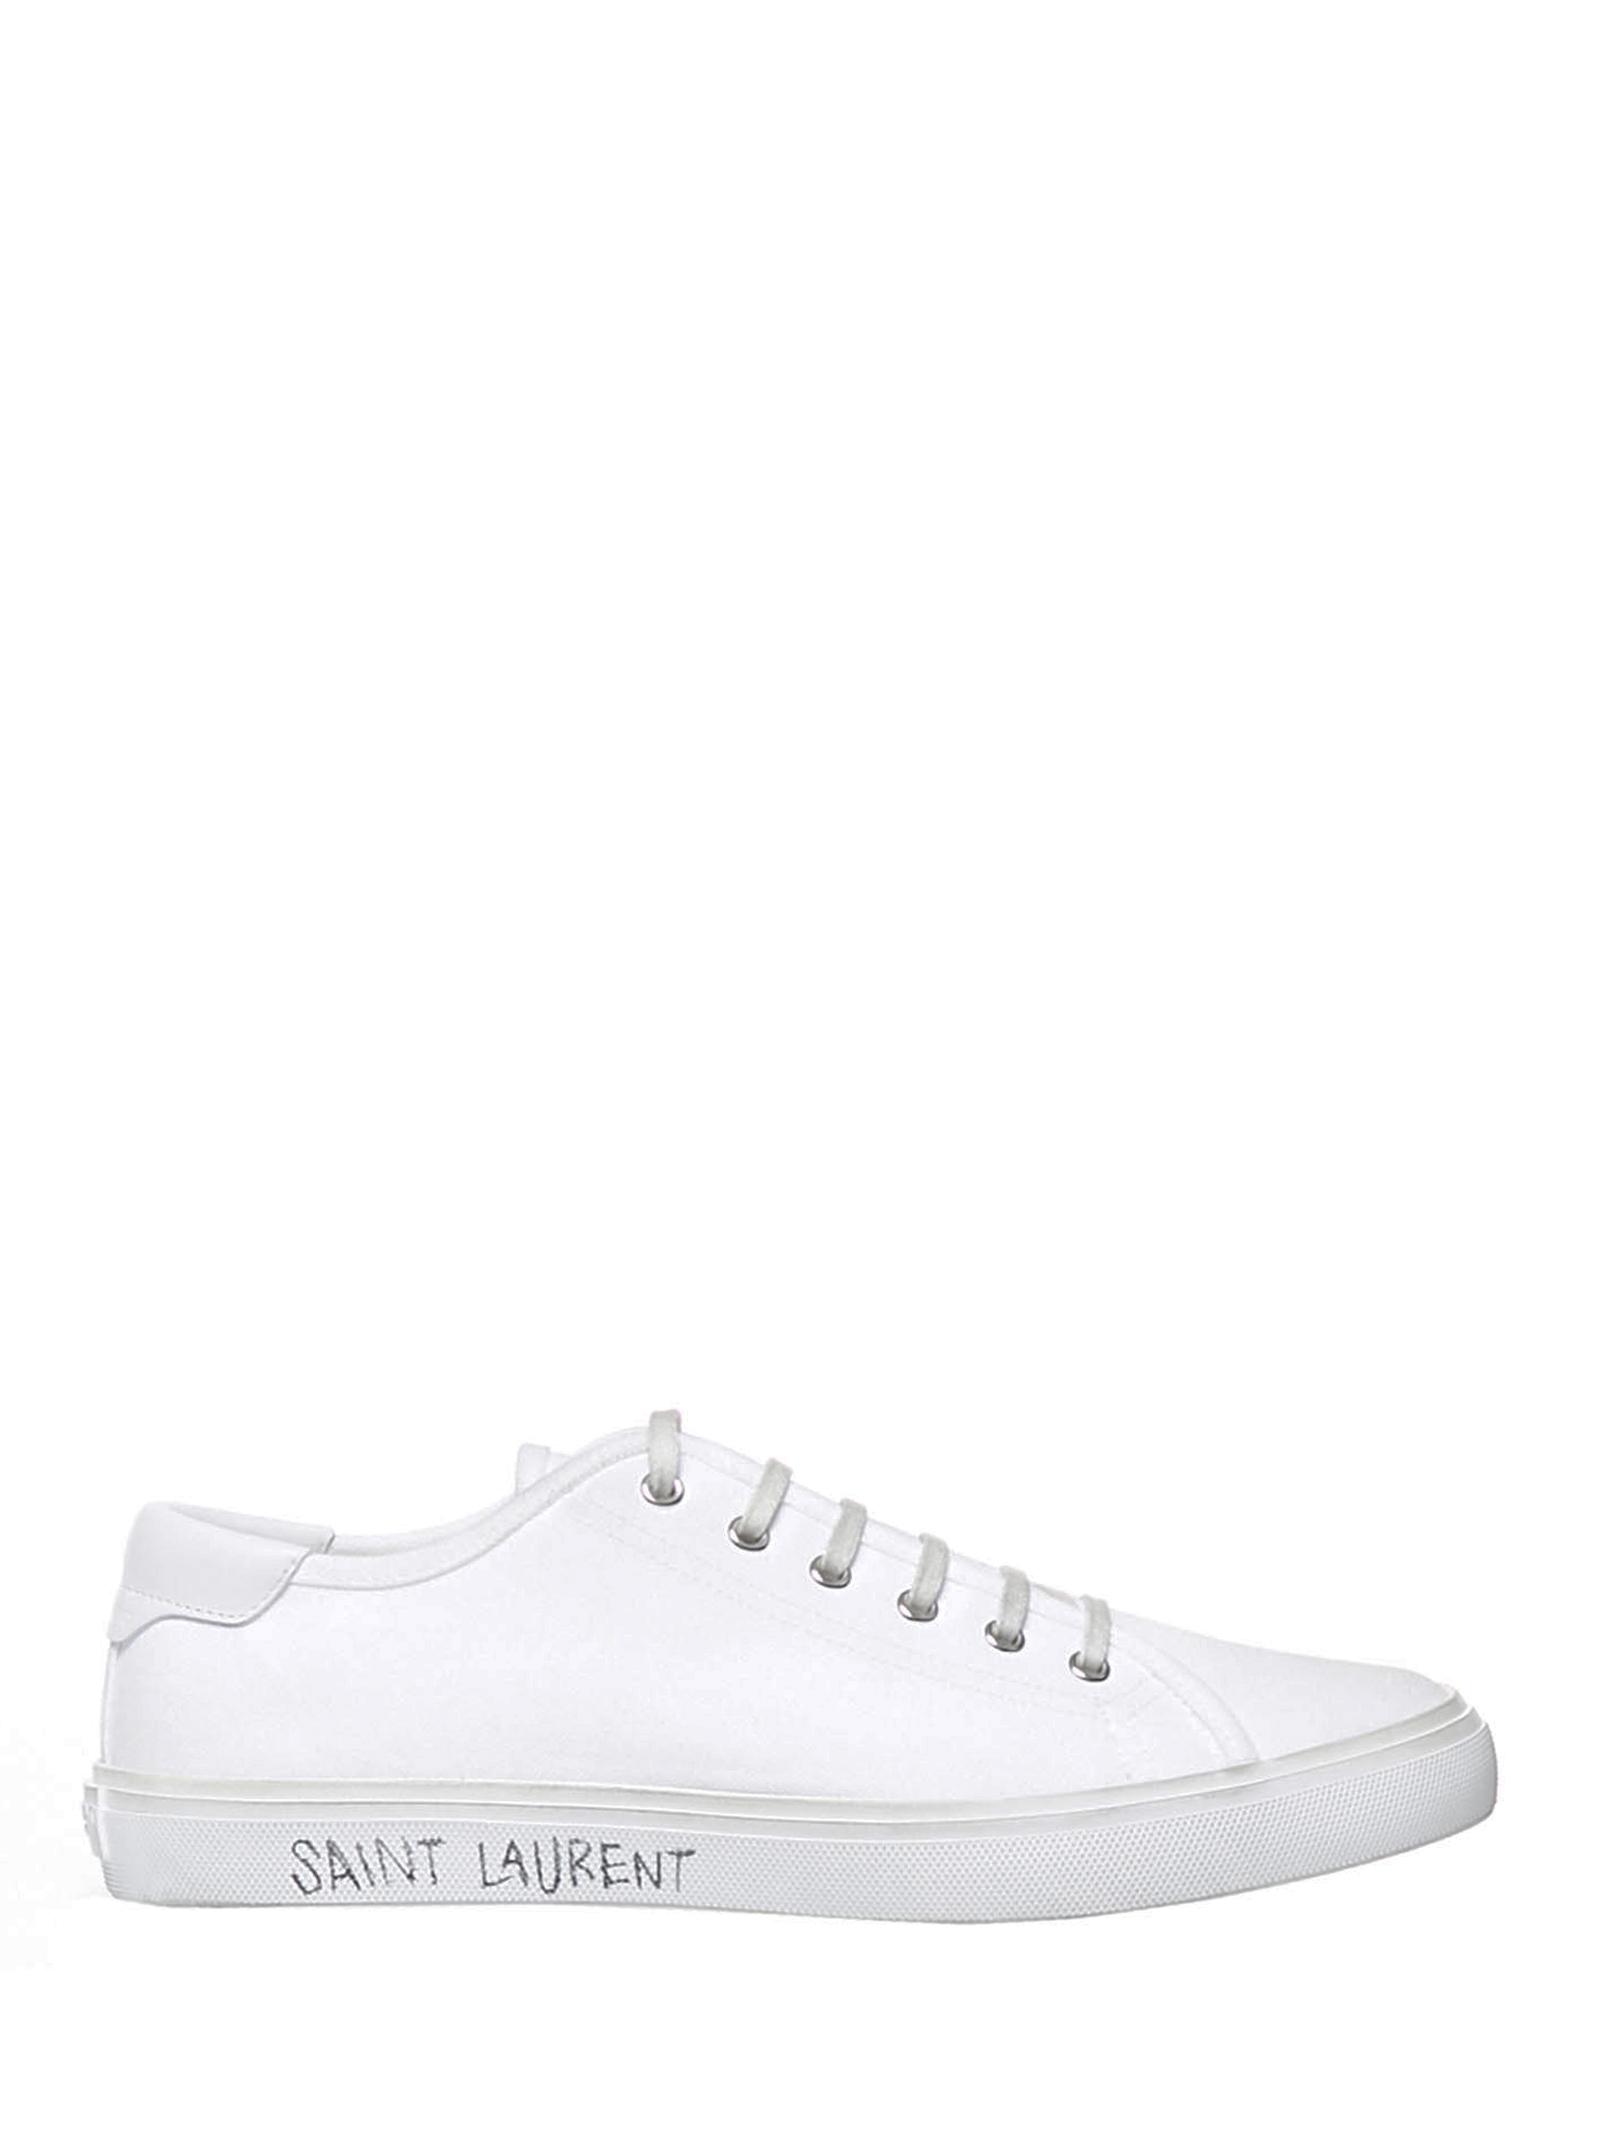 Saint Laurent White Malibu Canvas Sneakers With Leather Details And ...